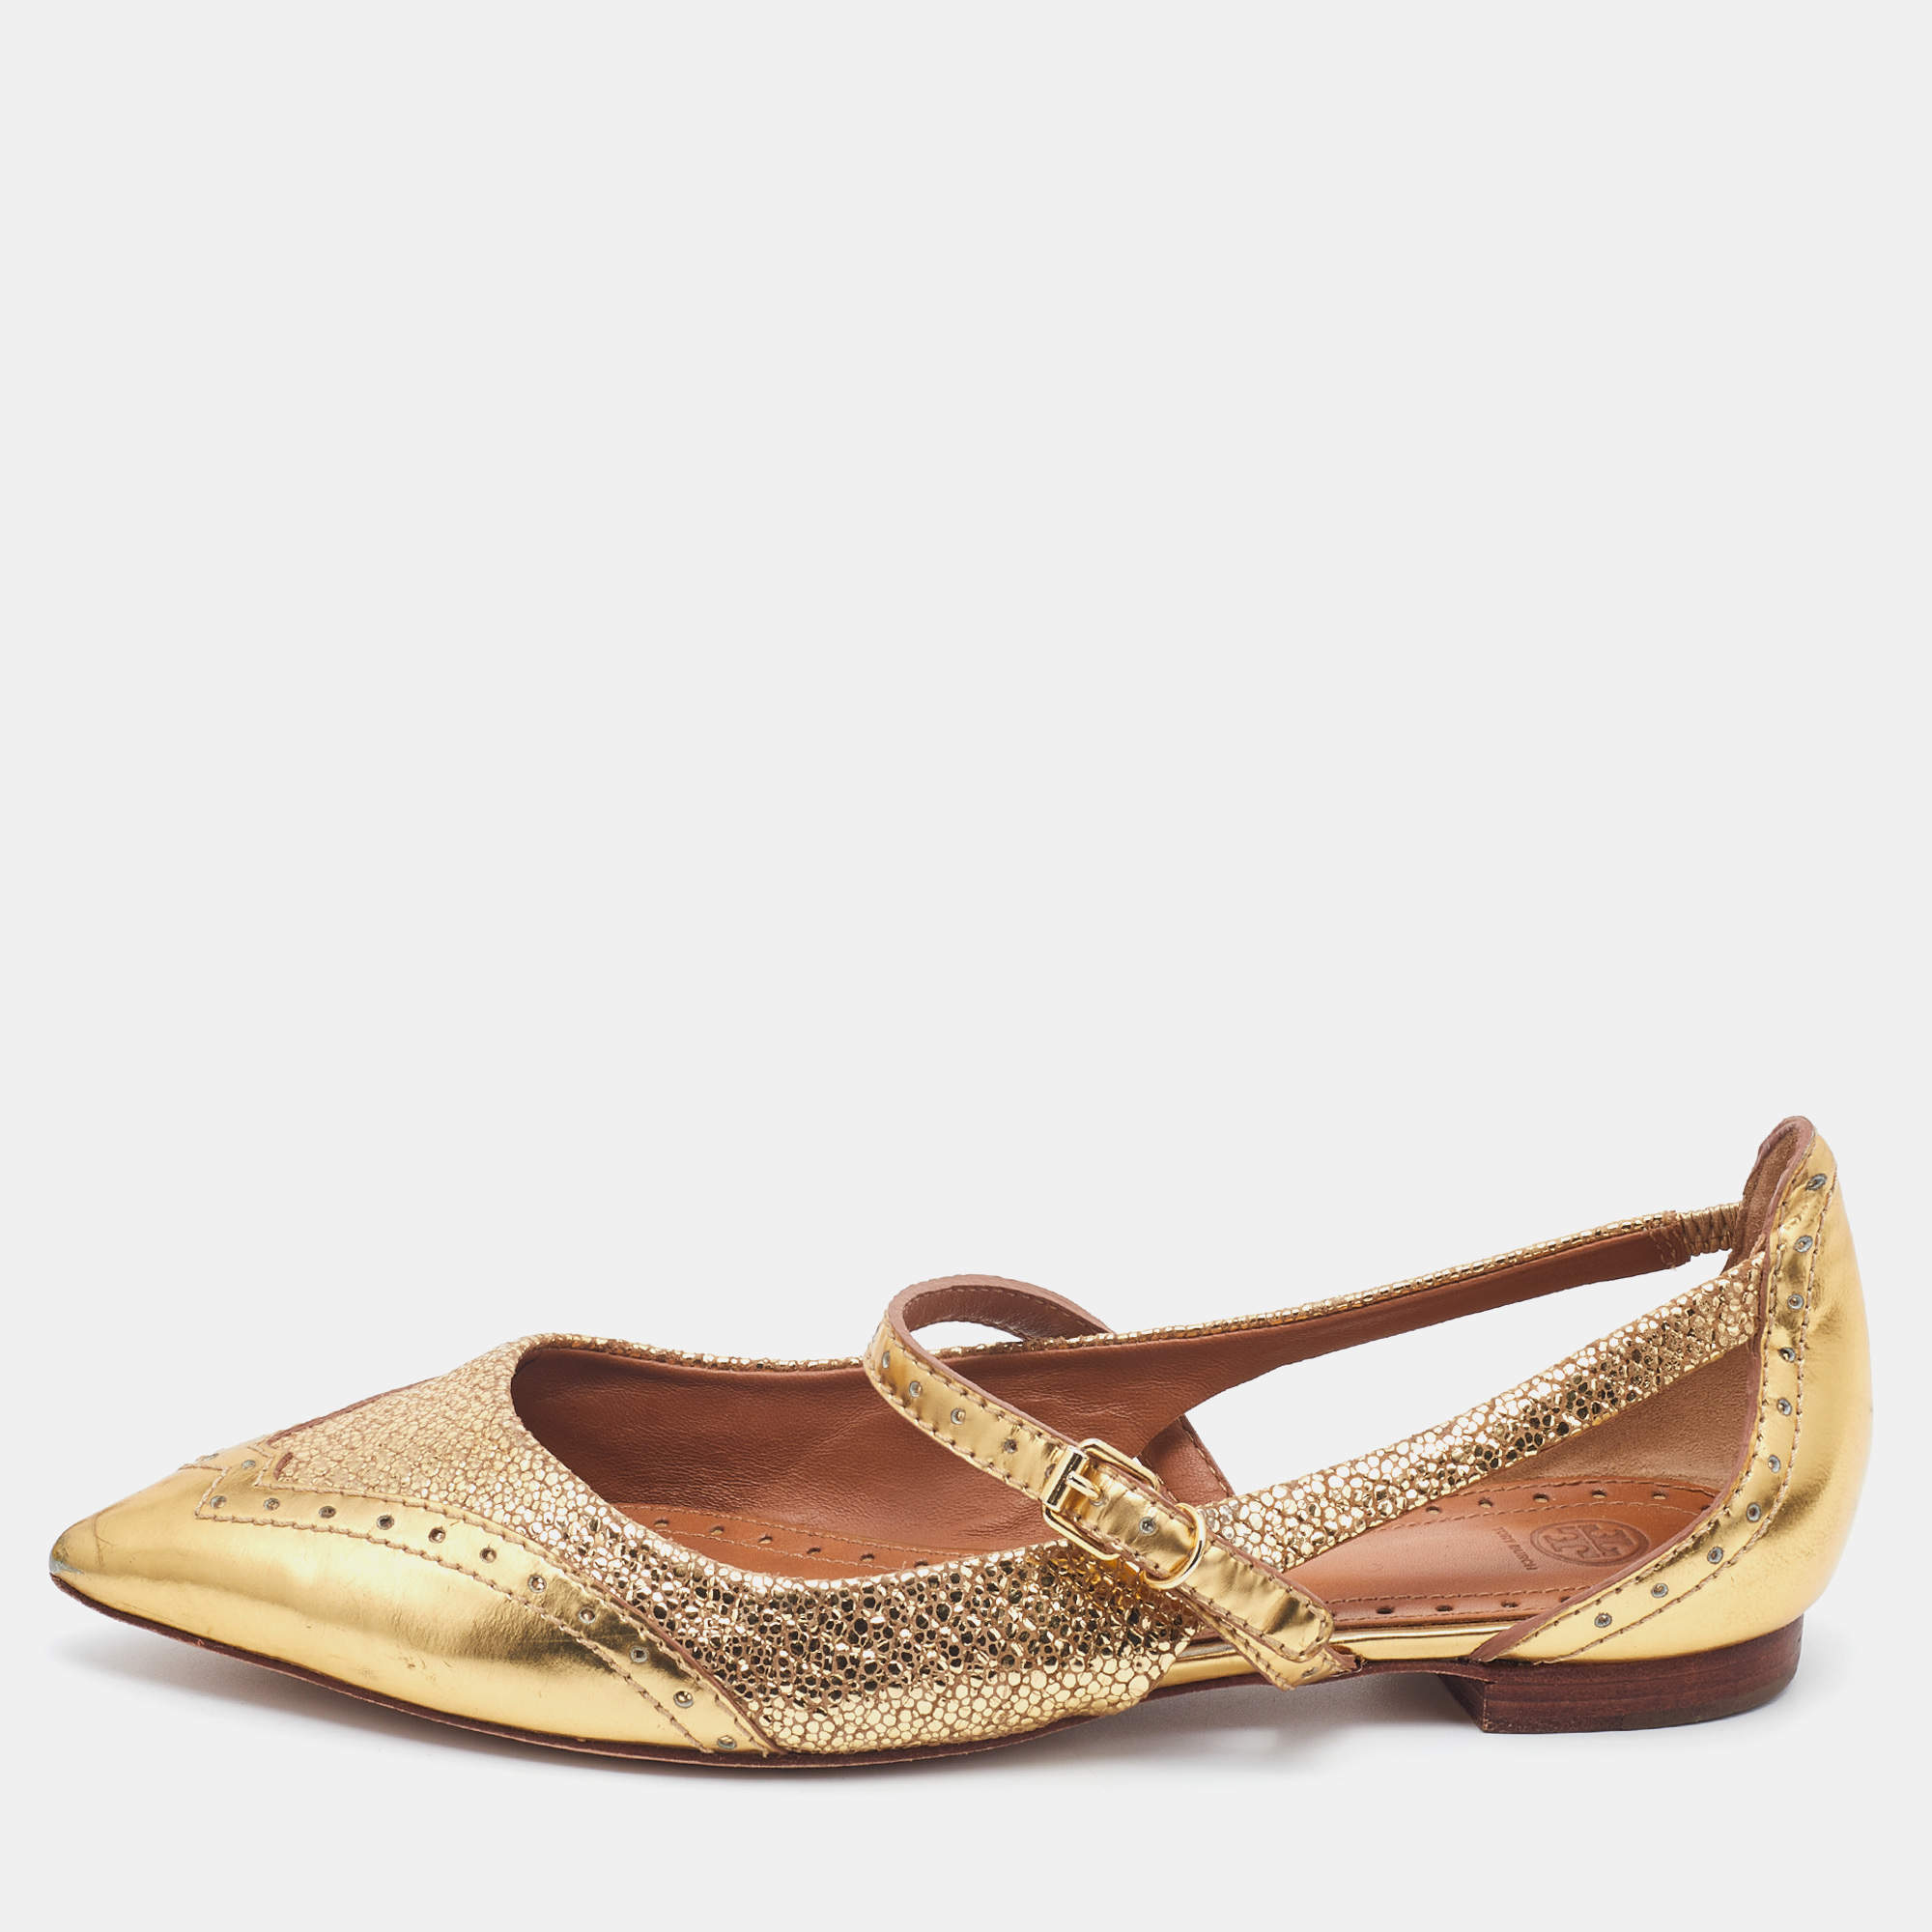 Tory Burch Gold Leather Bernadette Pointed Toe Mary Jane Ballet Flats Size 38